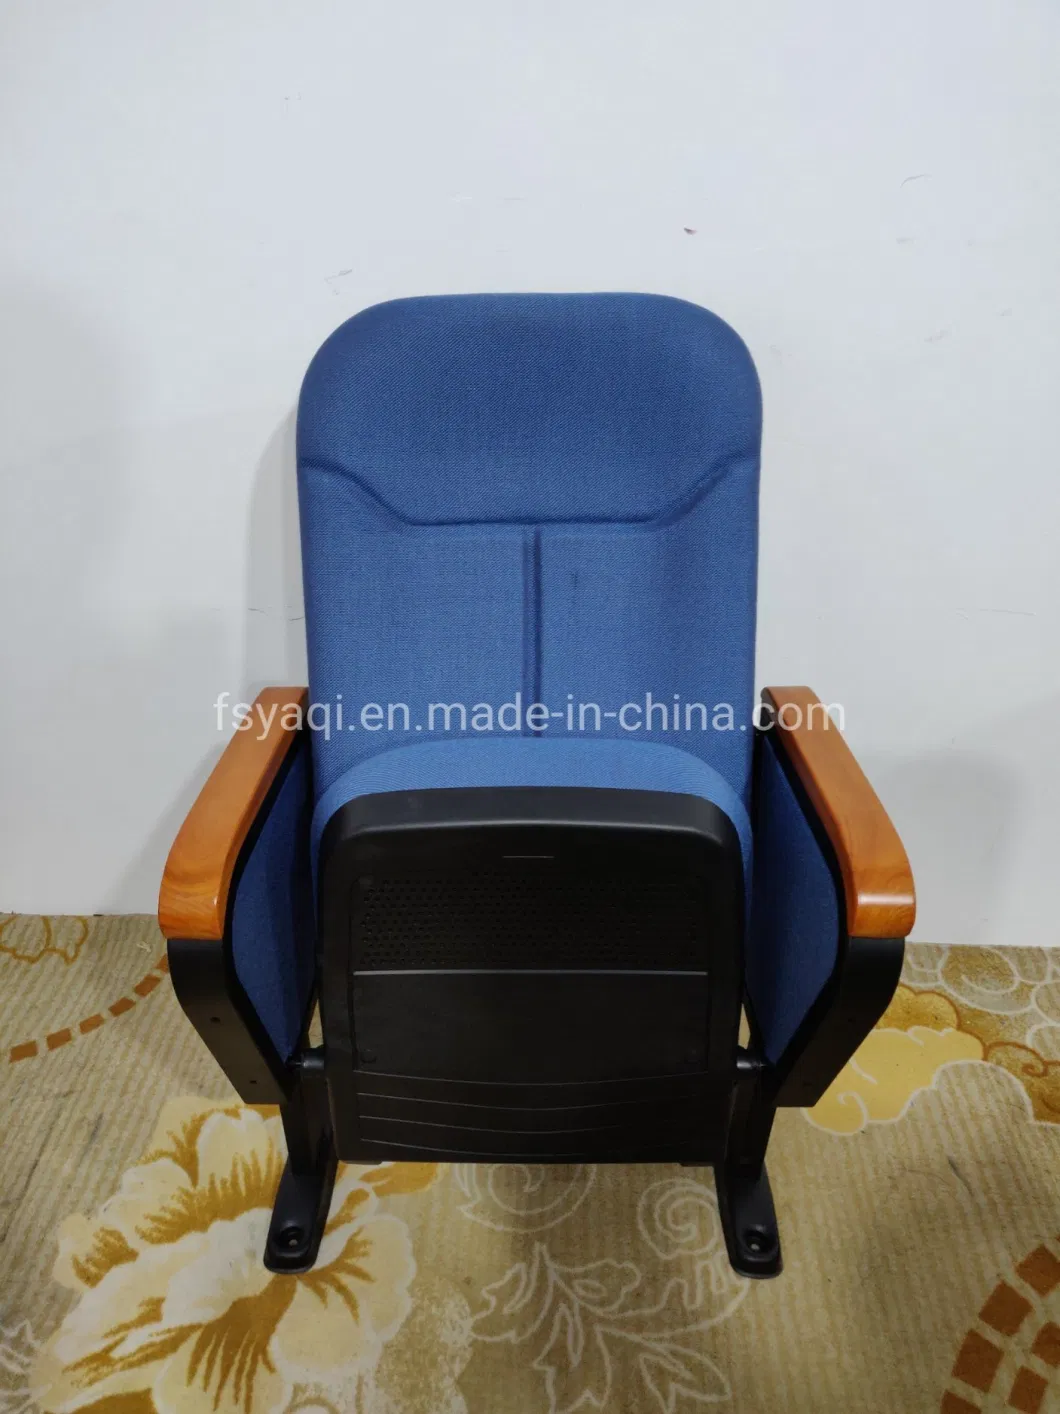 Hotsale Competitve Foldable Metal Theater Chair Auditorium Chair Cheap Price Upholstery Small Size Church Chair (YA-16A)